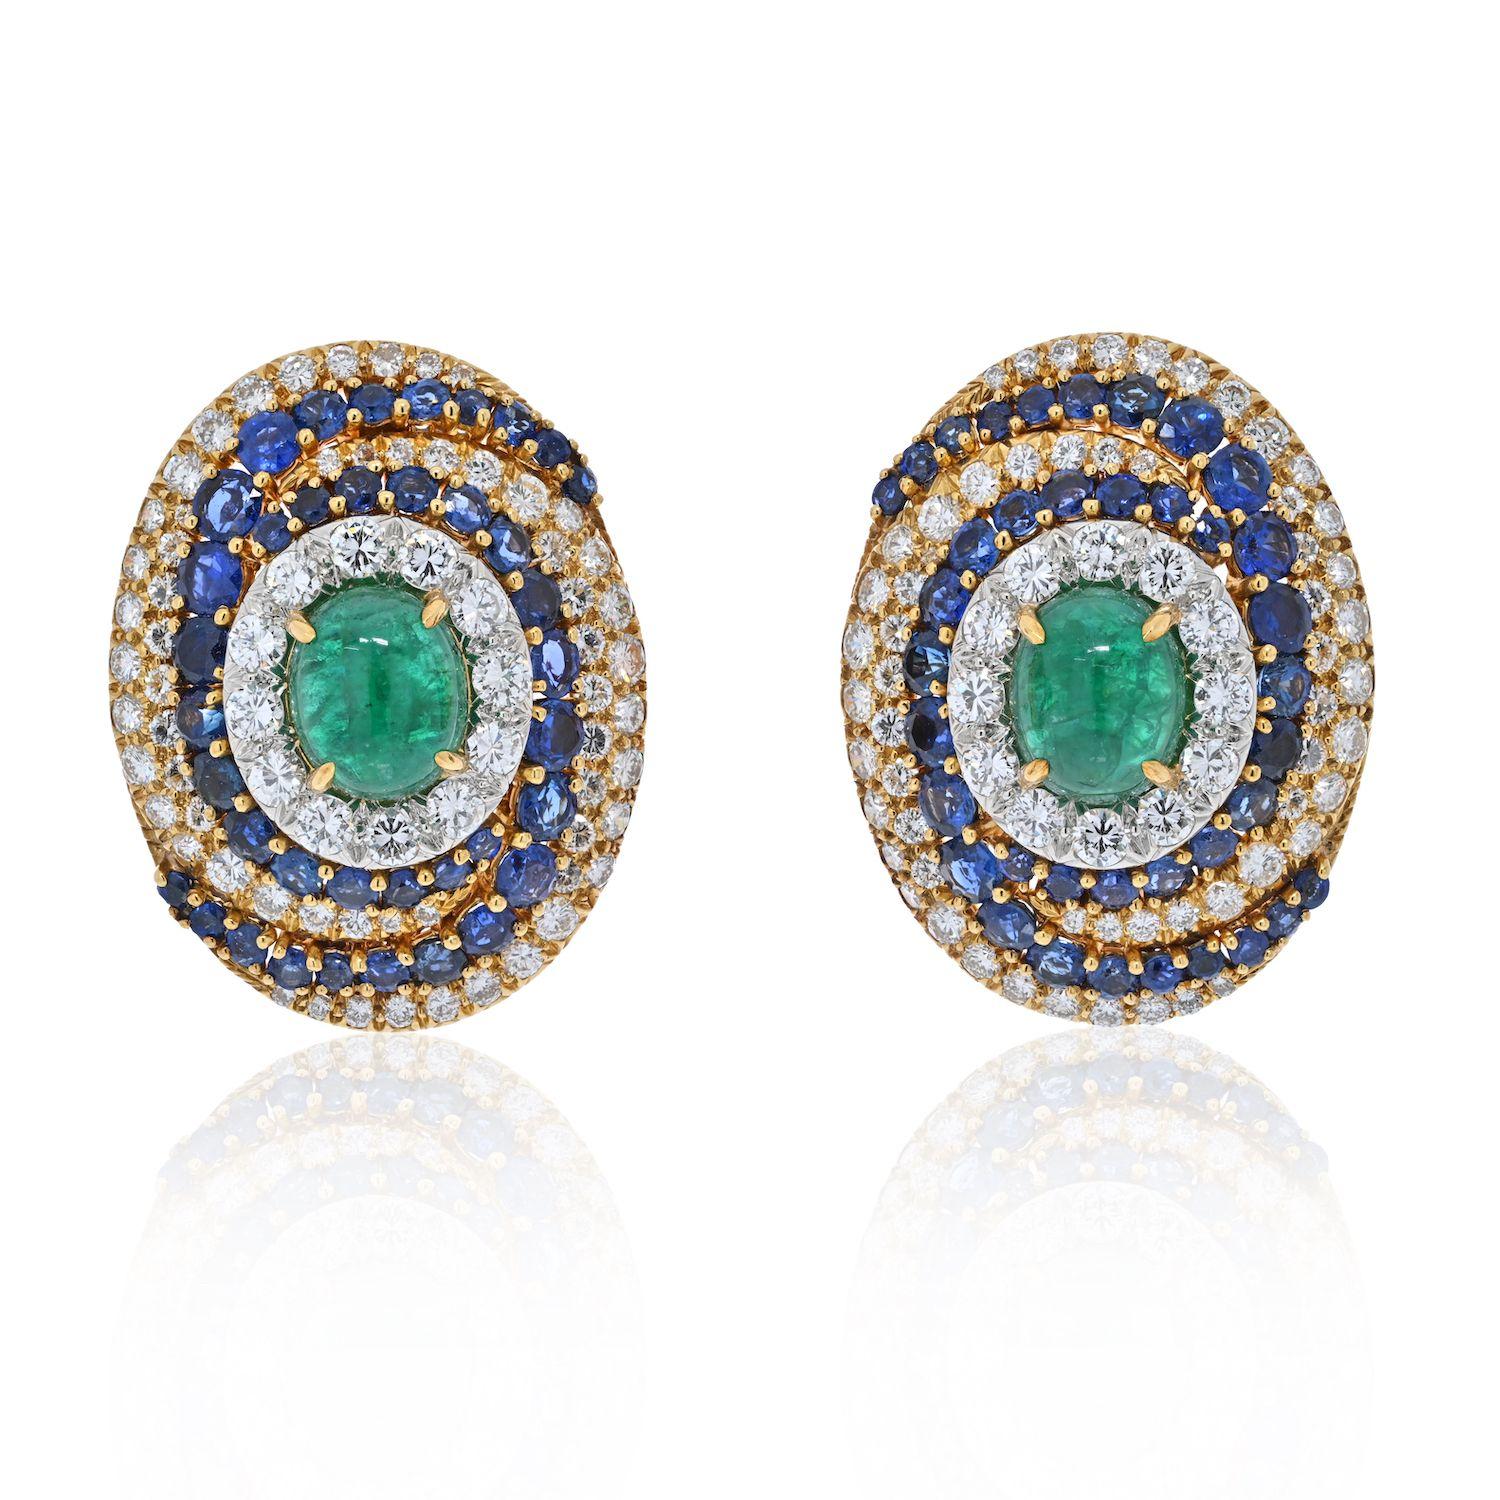 David Webb Bombe Style Highly Decorated Diamond, Sapphire and Emerald Earrings In Excellent Condition For Sale In New York, NY